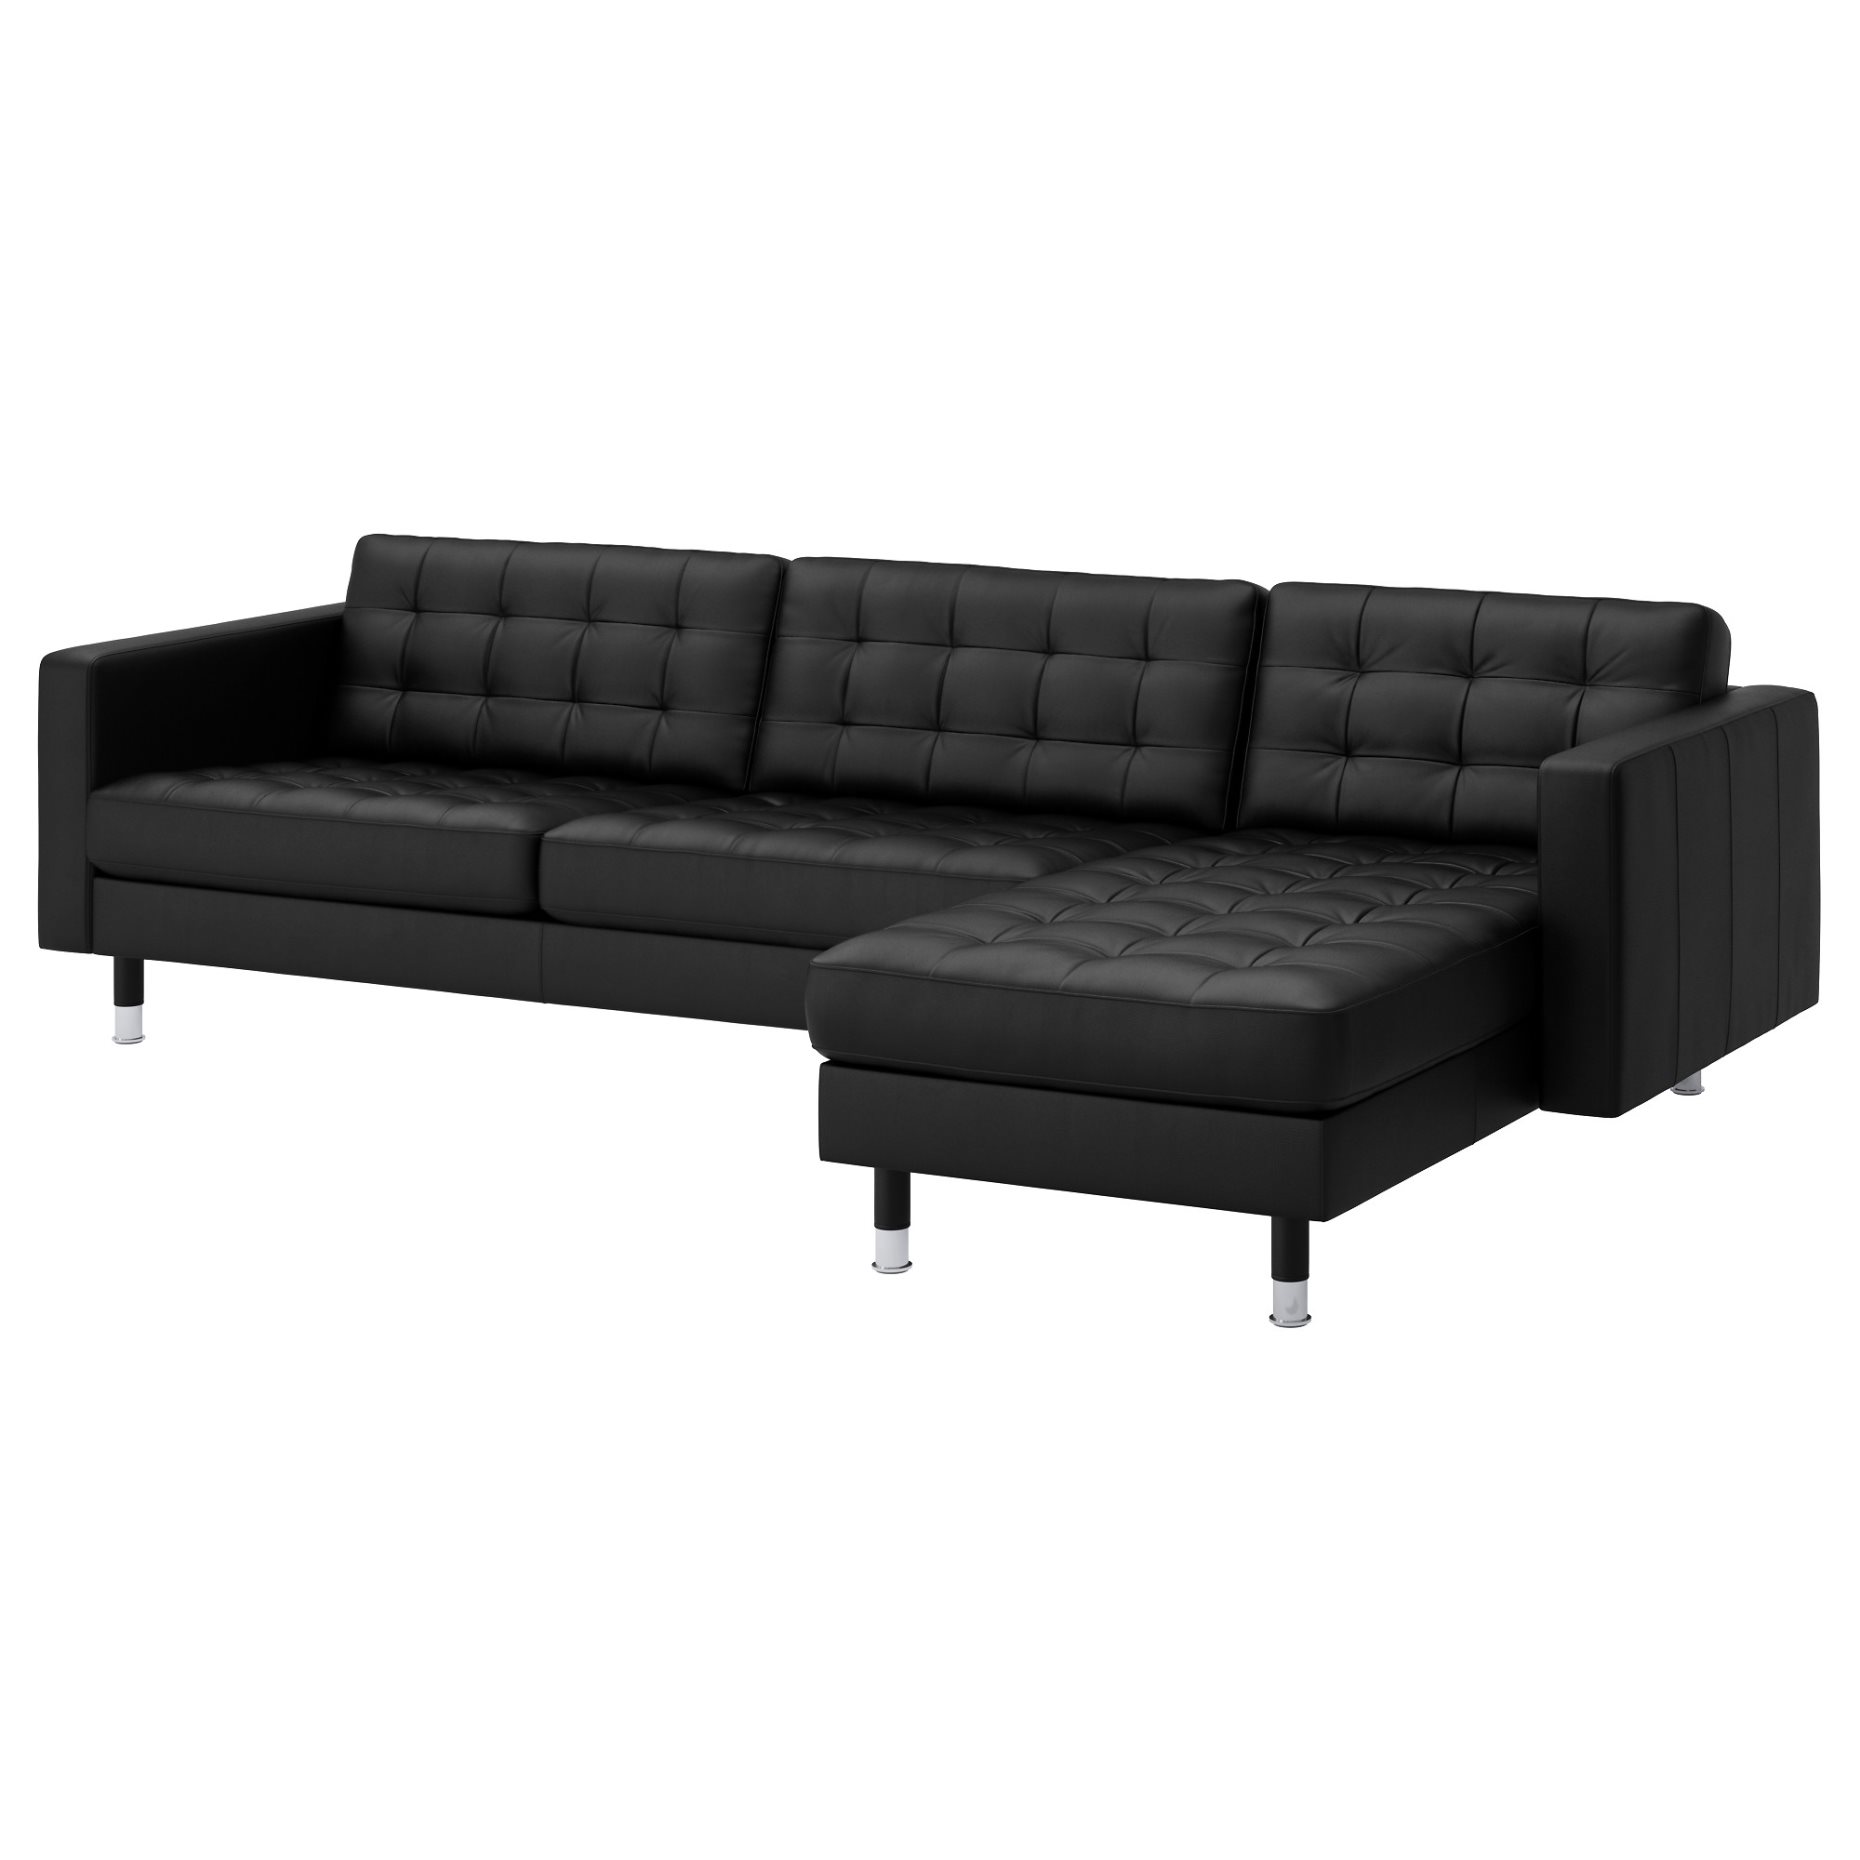 LANDSKRONA, 4-seat sofa with chaise longue, 290.324.06